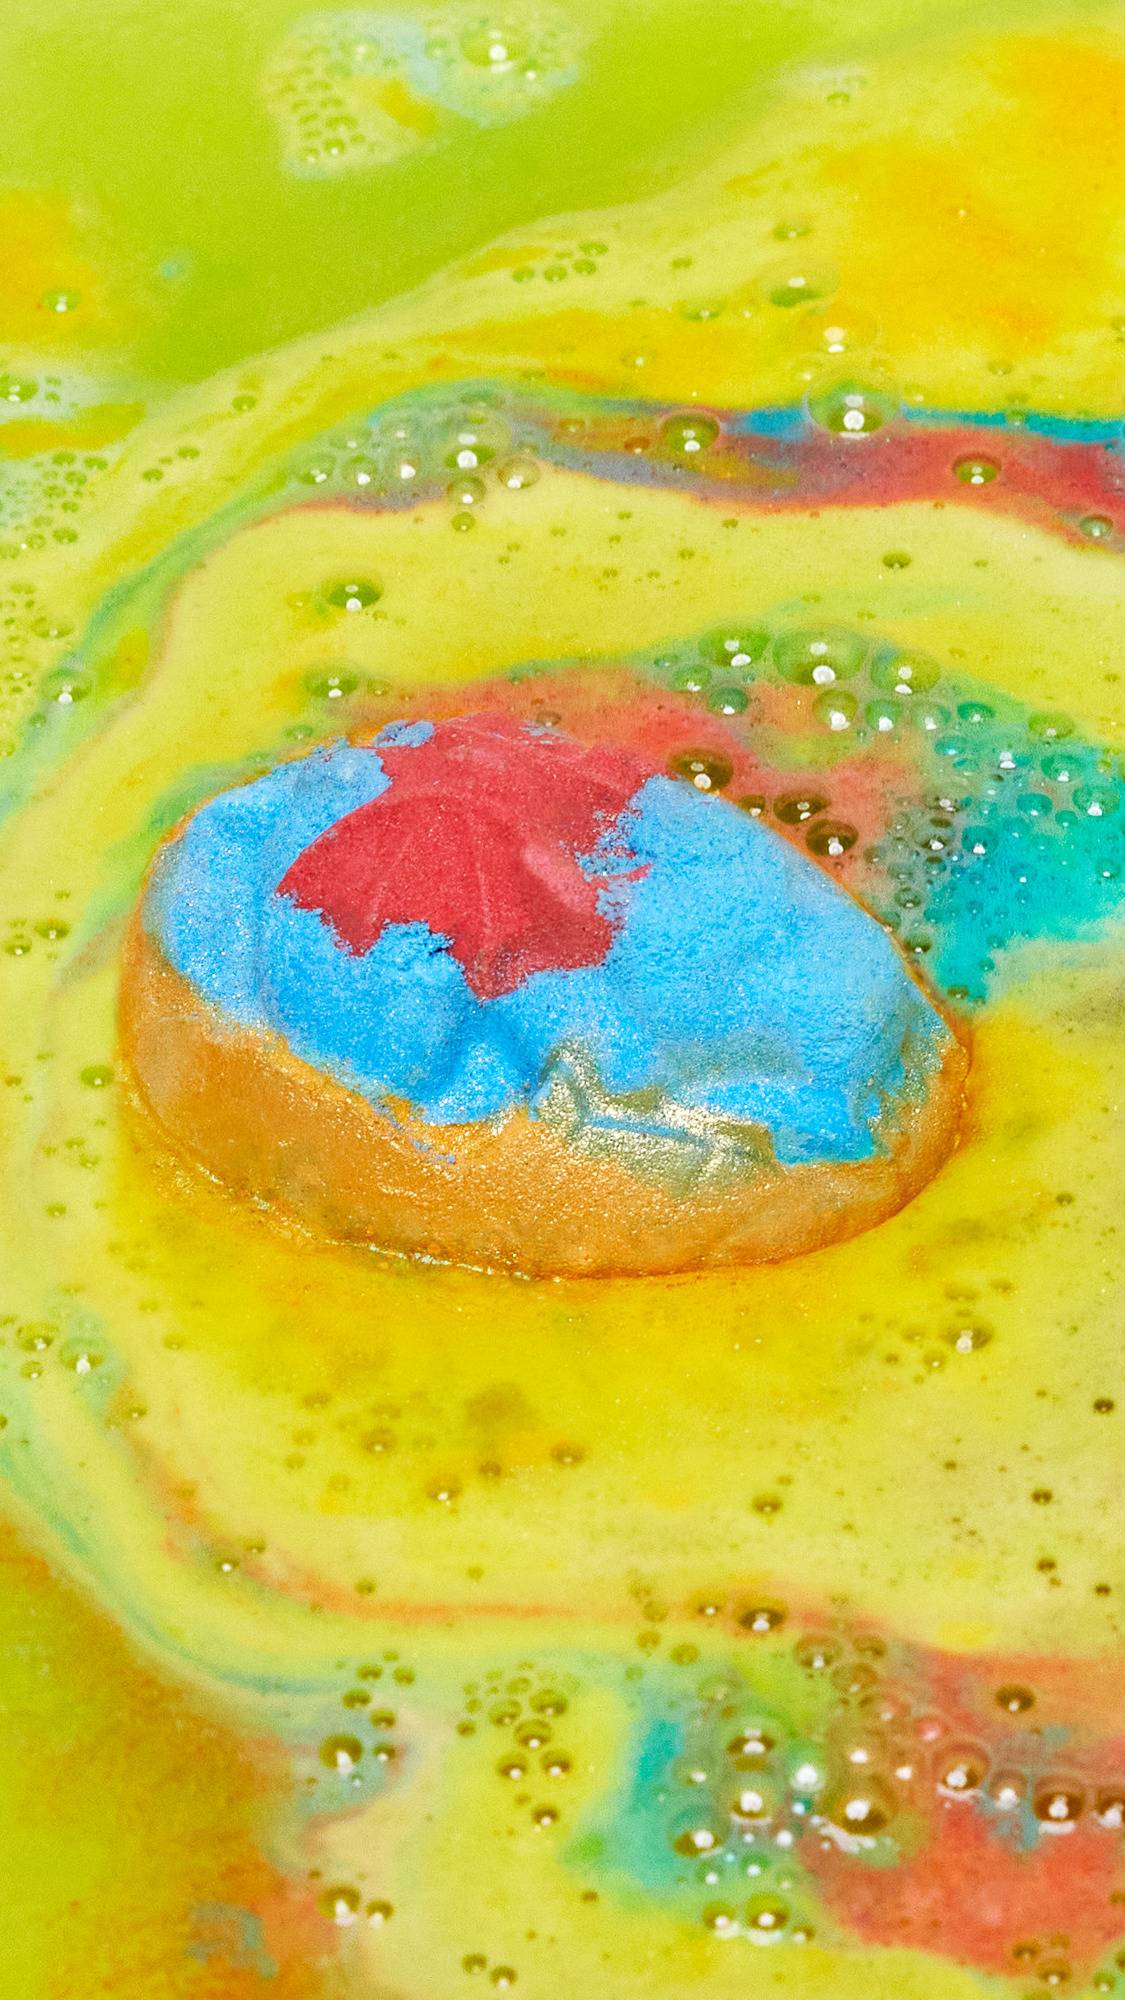 The Crackle bath bomb has just been gently placed into the bath and is beginning to give of a sea of bright yellow, shimmering waters with blue and red ripples. 